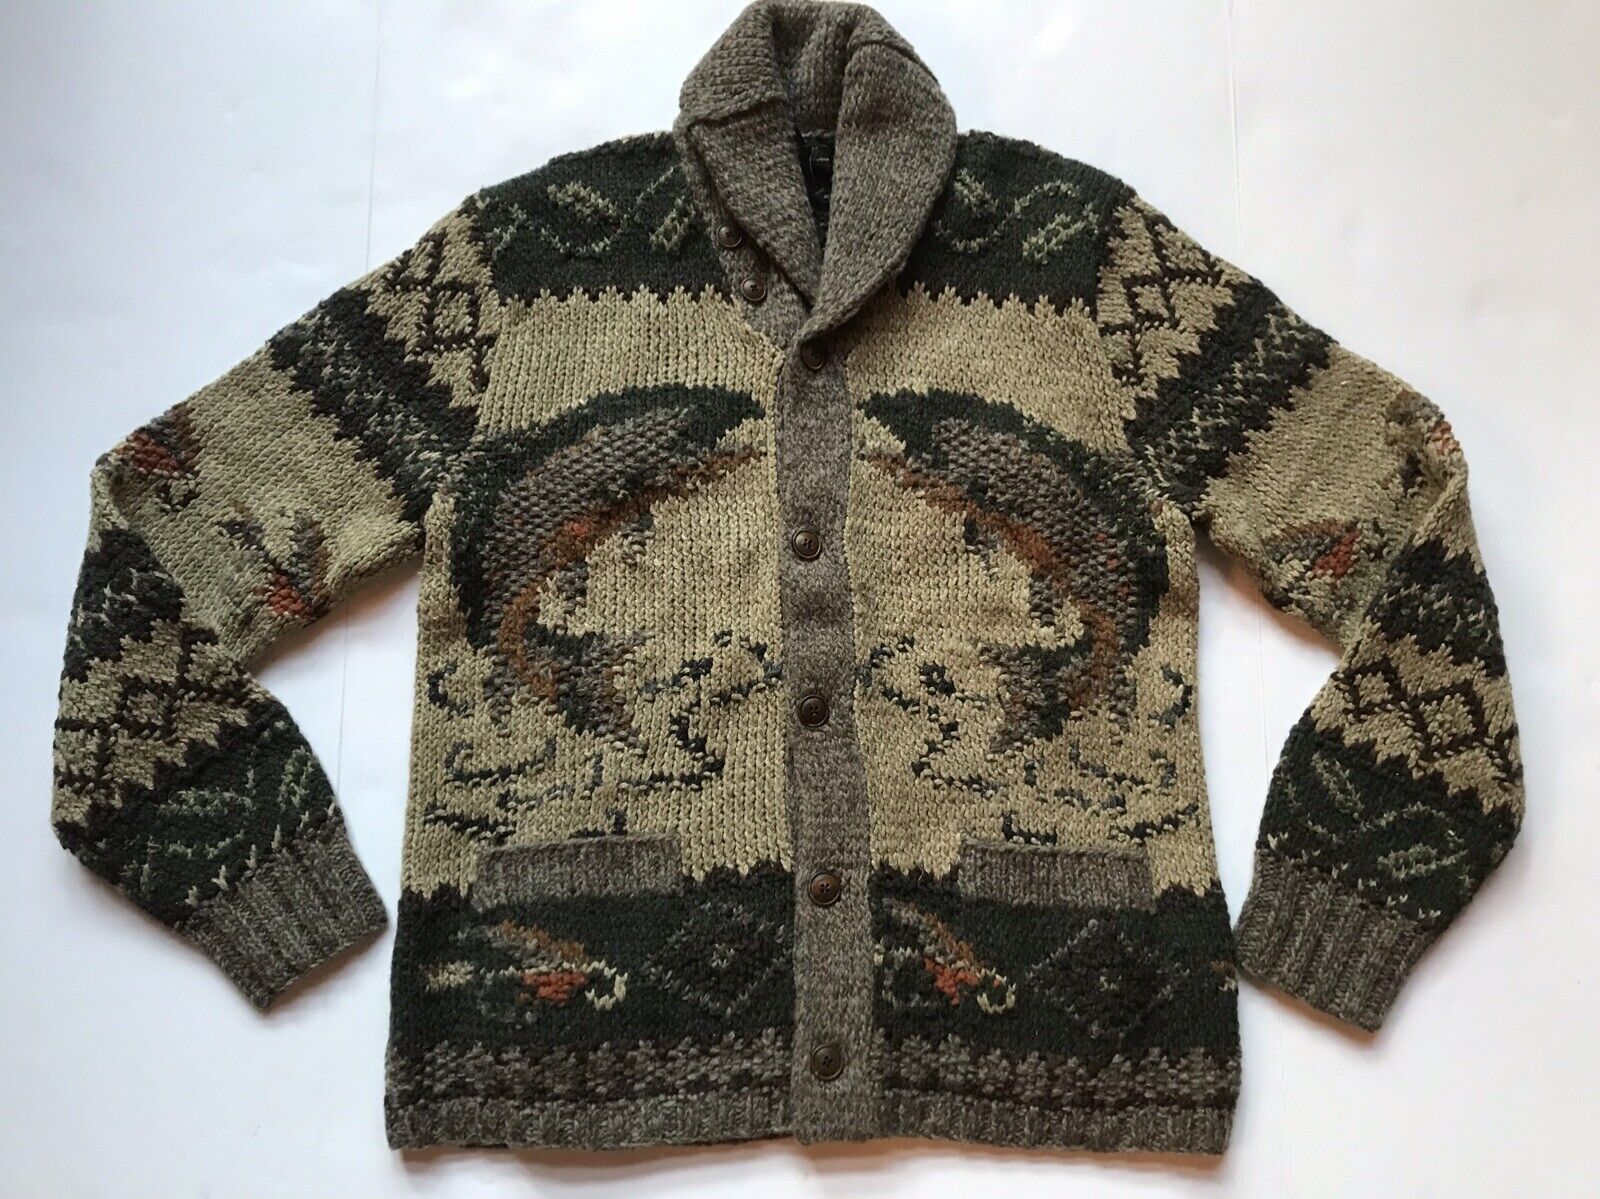 derek guy on X: fishing-themed clothes I've seen on  1. Vintage Orvis  sweater 2. Vintage Ideal jackets 3. Handknit RRL shawl collar cardigan 4.  Russell Mocassin fishing oxfords (pls note, these